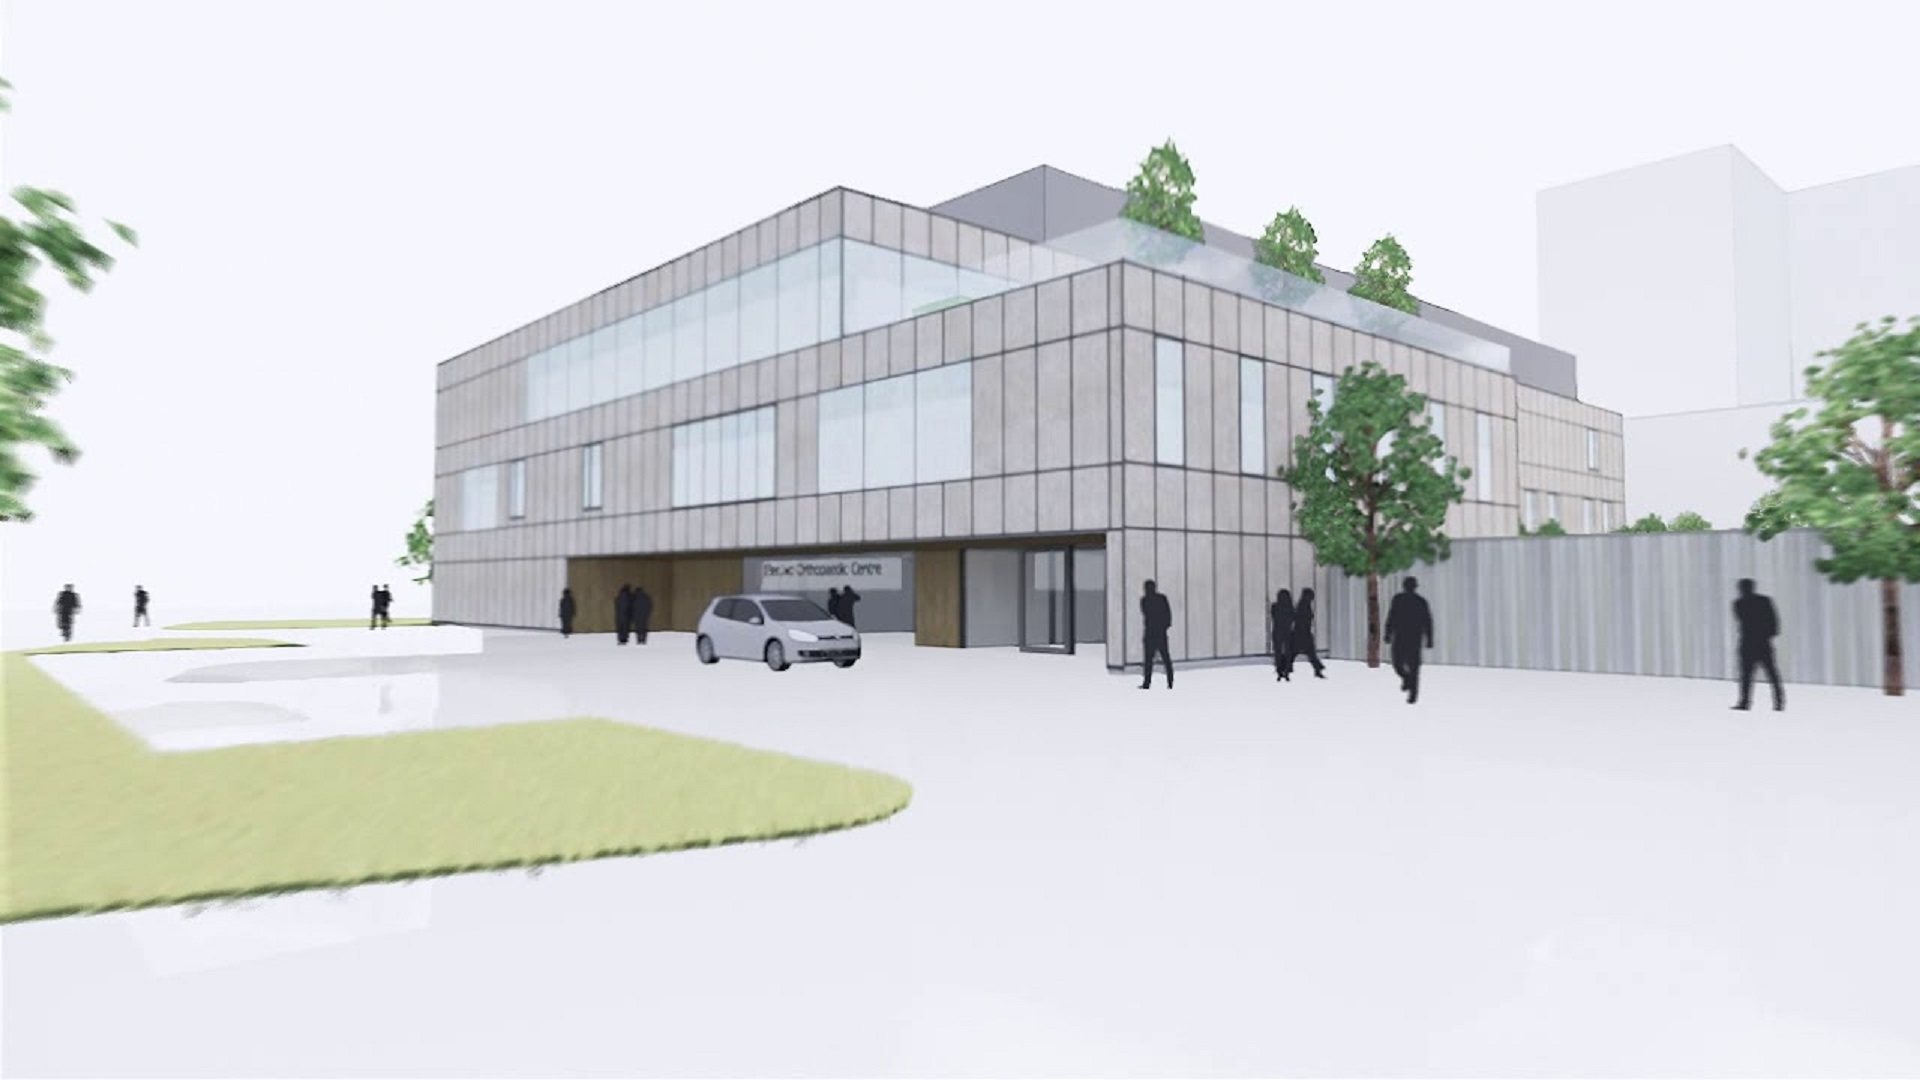 How the new orthopaedic centre might look.